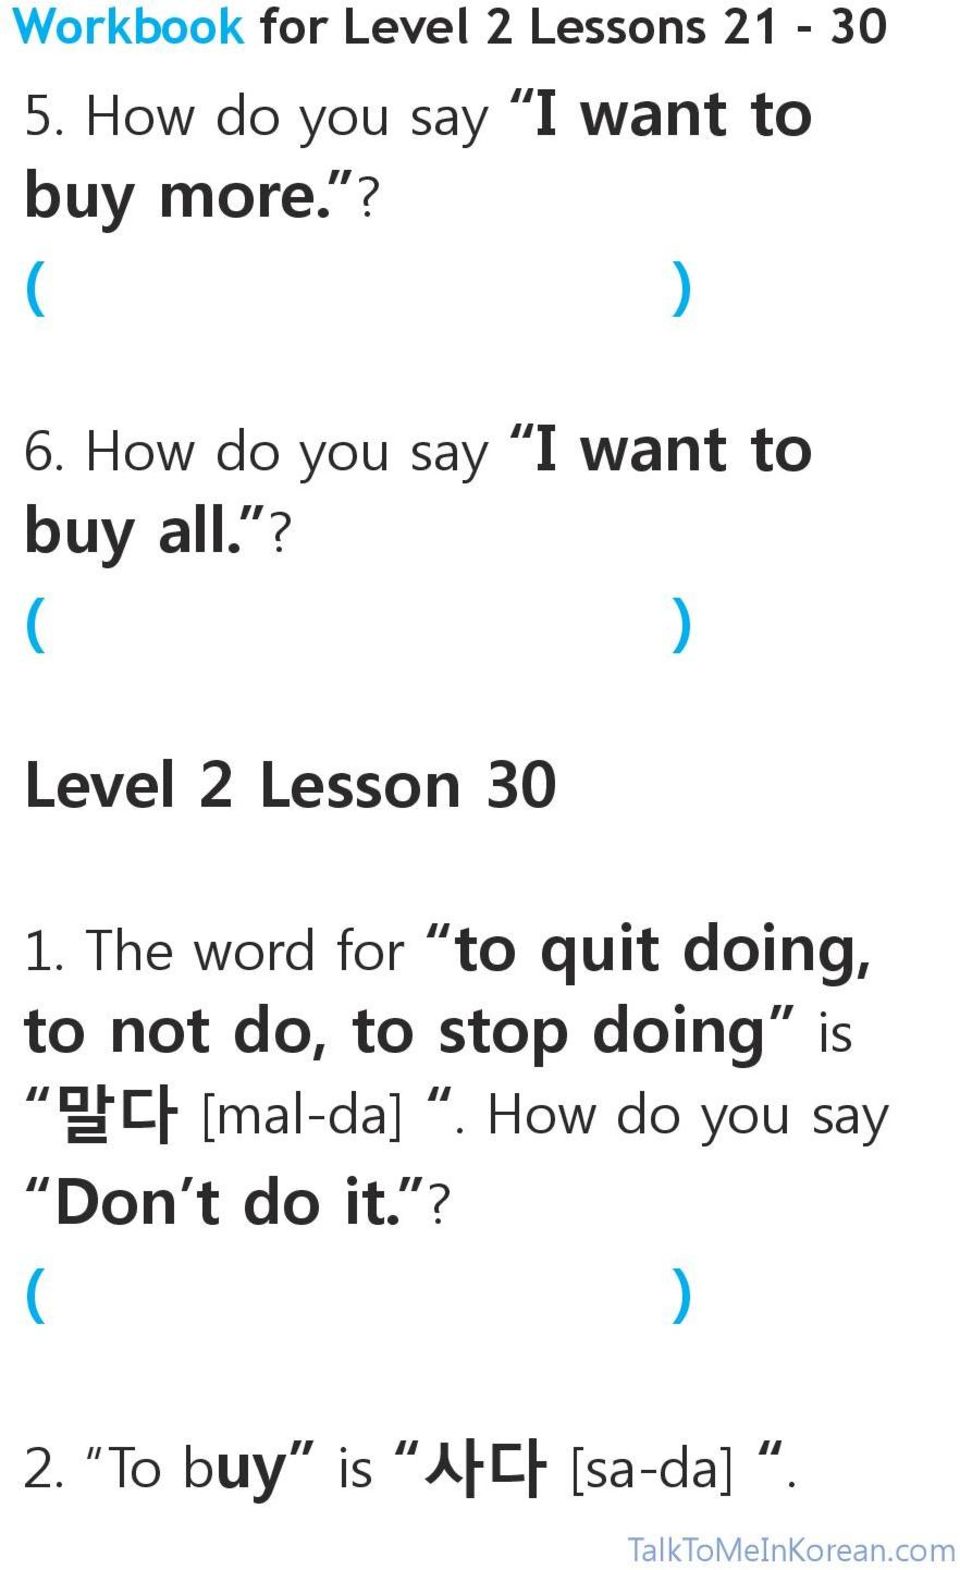 The word for to quit doing, to not do, to stop doing